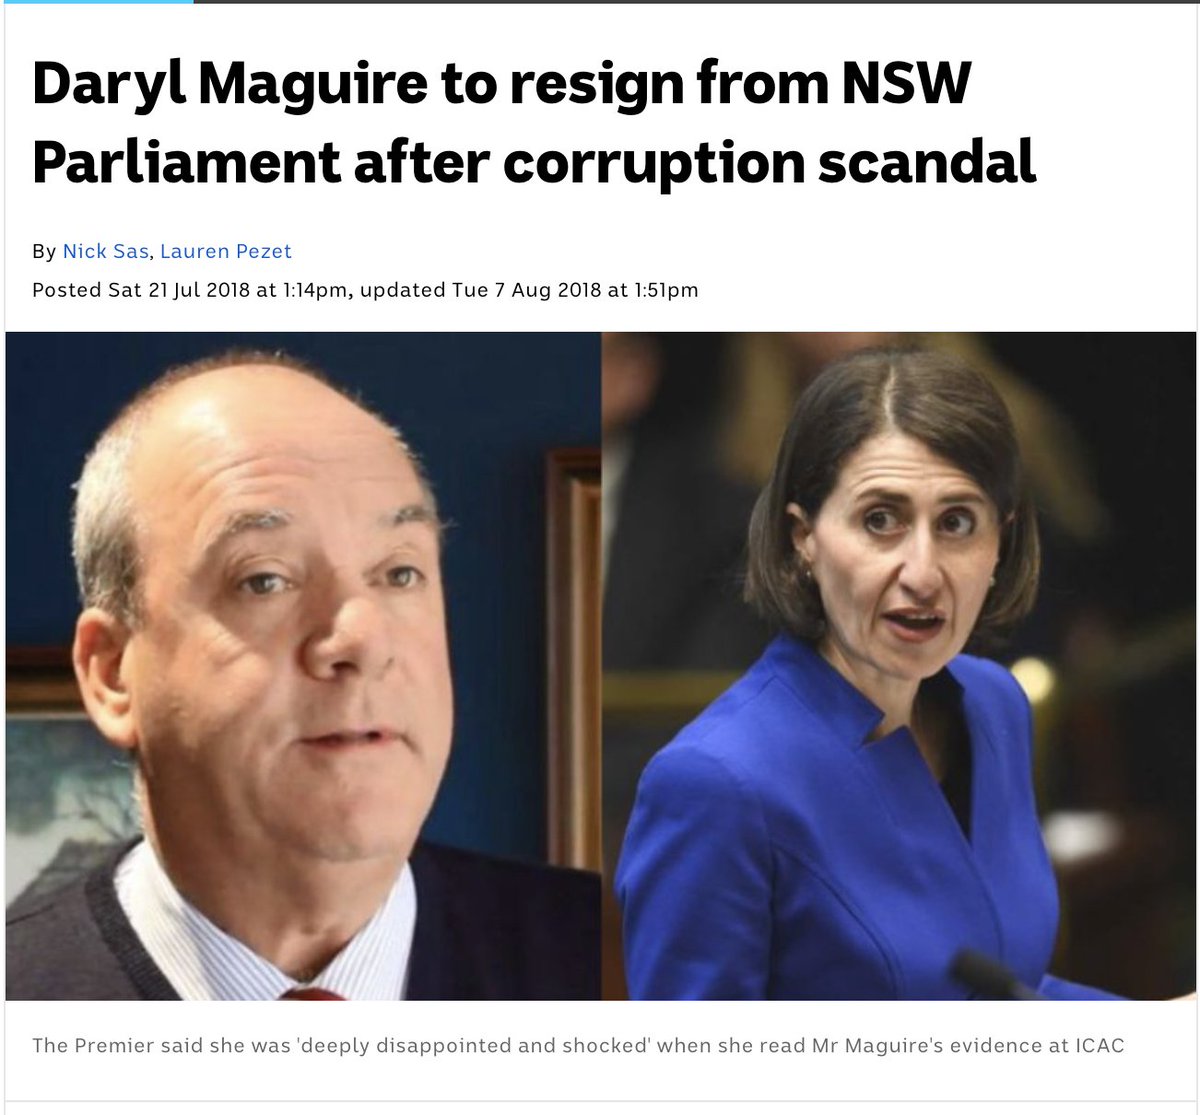 And, Wagga Wagga received massive grants during the by-election caused by the resignation of disgraced Liberal MP, Darryl McGuire over corruption allegations.